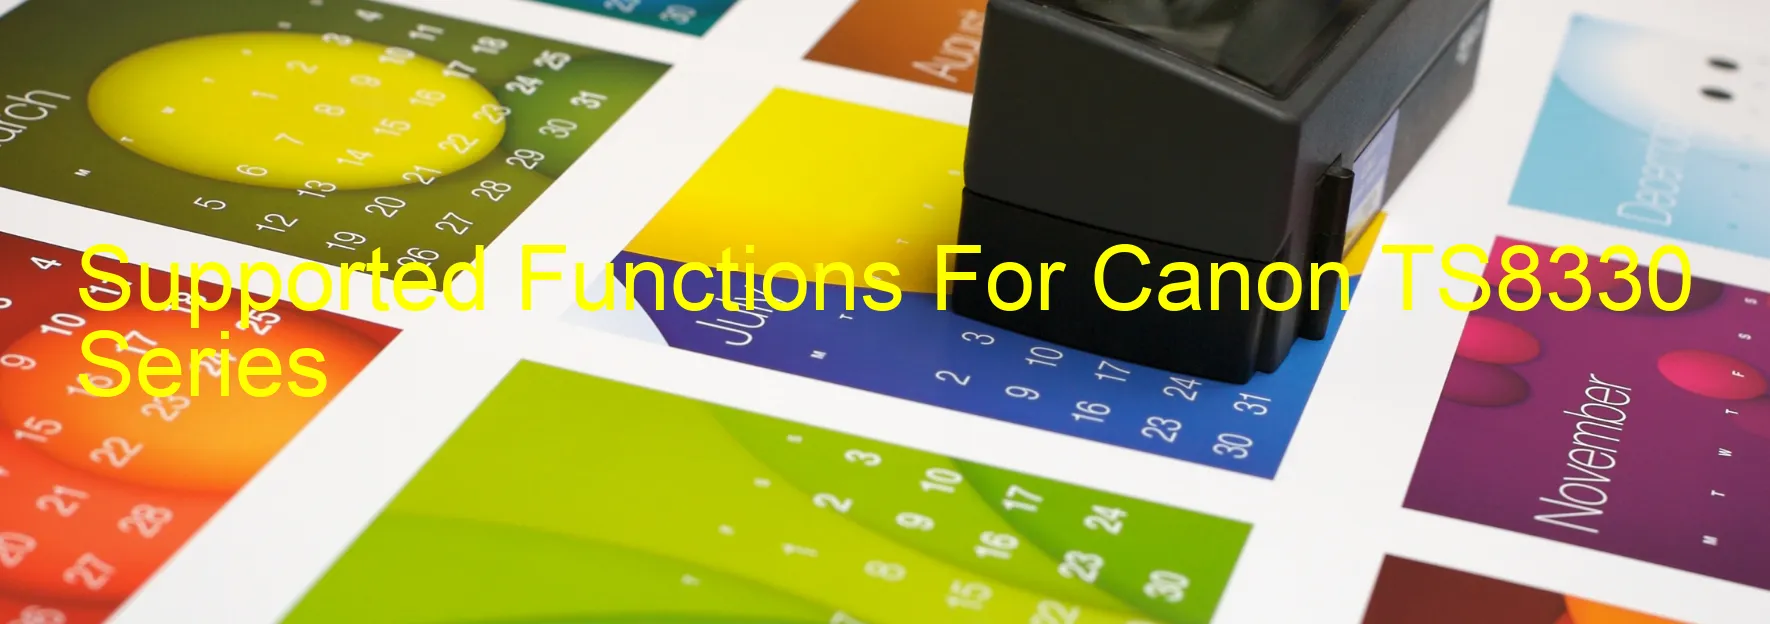 supported-functions-for-canon-ts8330-series.webp